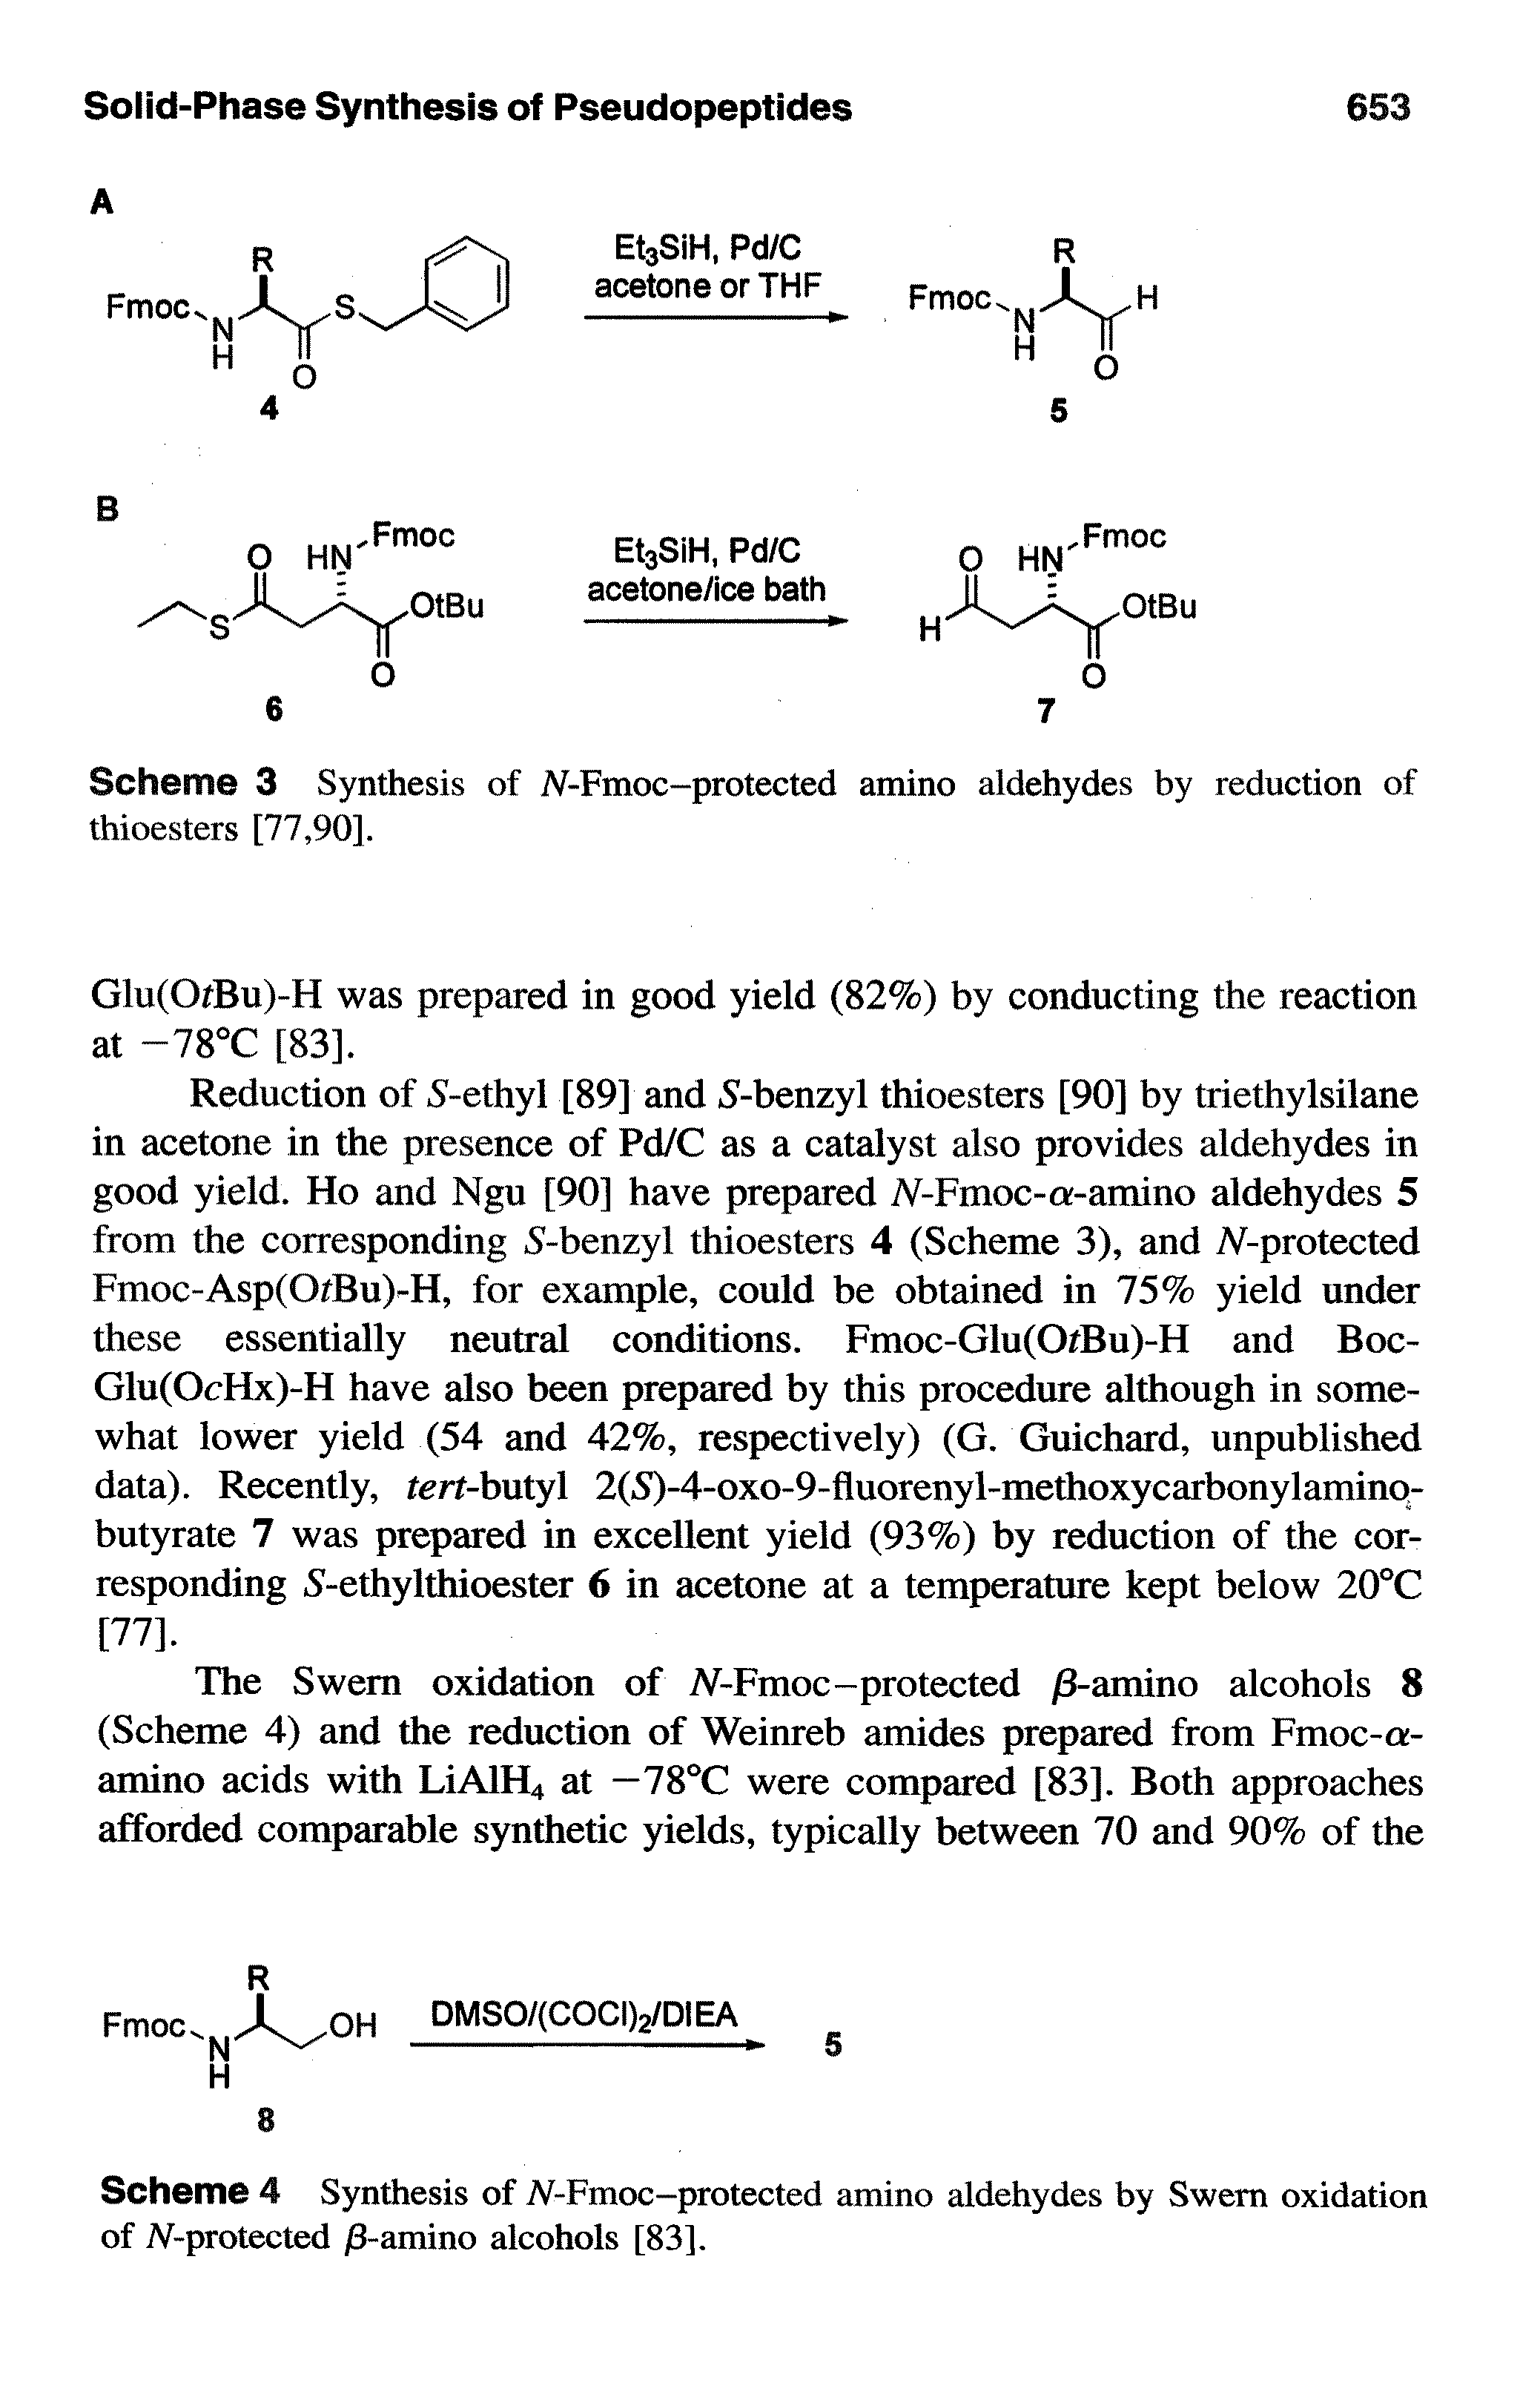 Scheme 3 Synthesis of iV-Fmoc-protected amino aldehydes by reduction of thioesters [77,90].